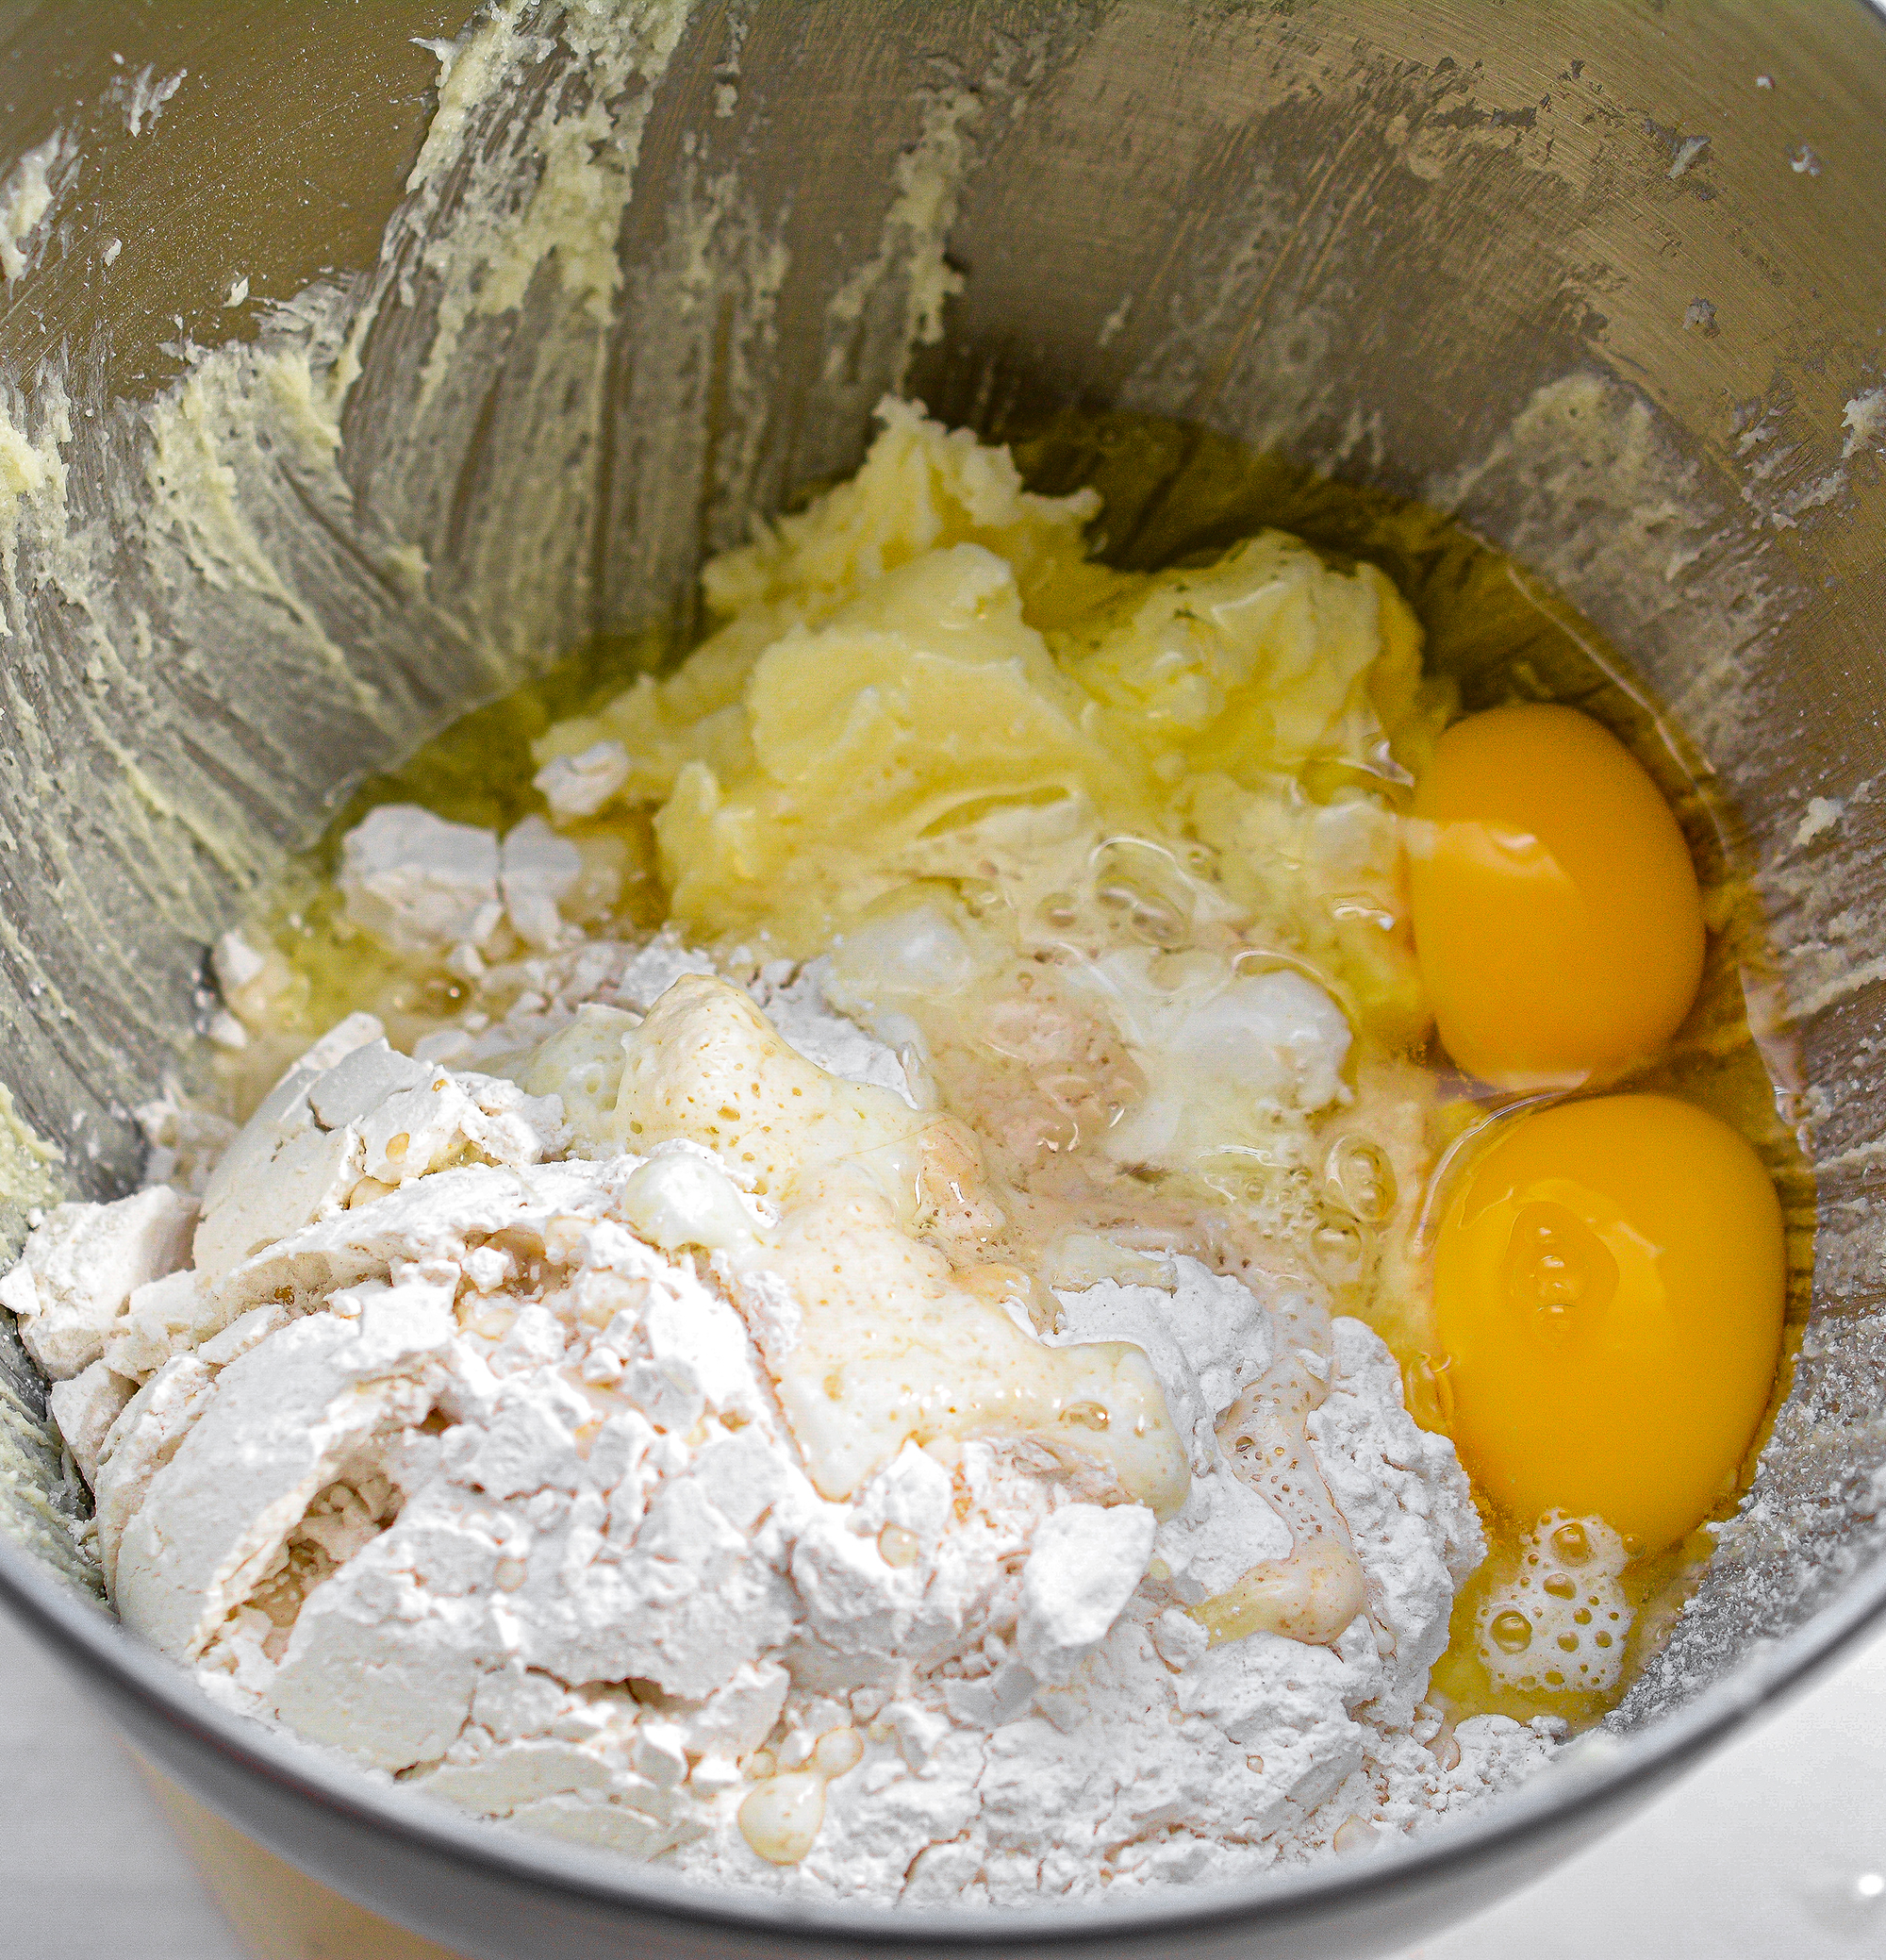 Mix in the flour, baking powder, eggs, lemon juice, and 1 tsp vanilla. Beat on high until well combined.